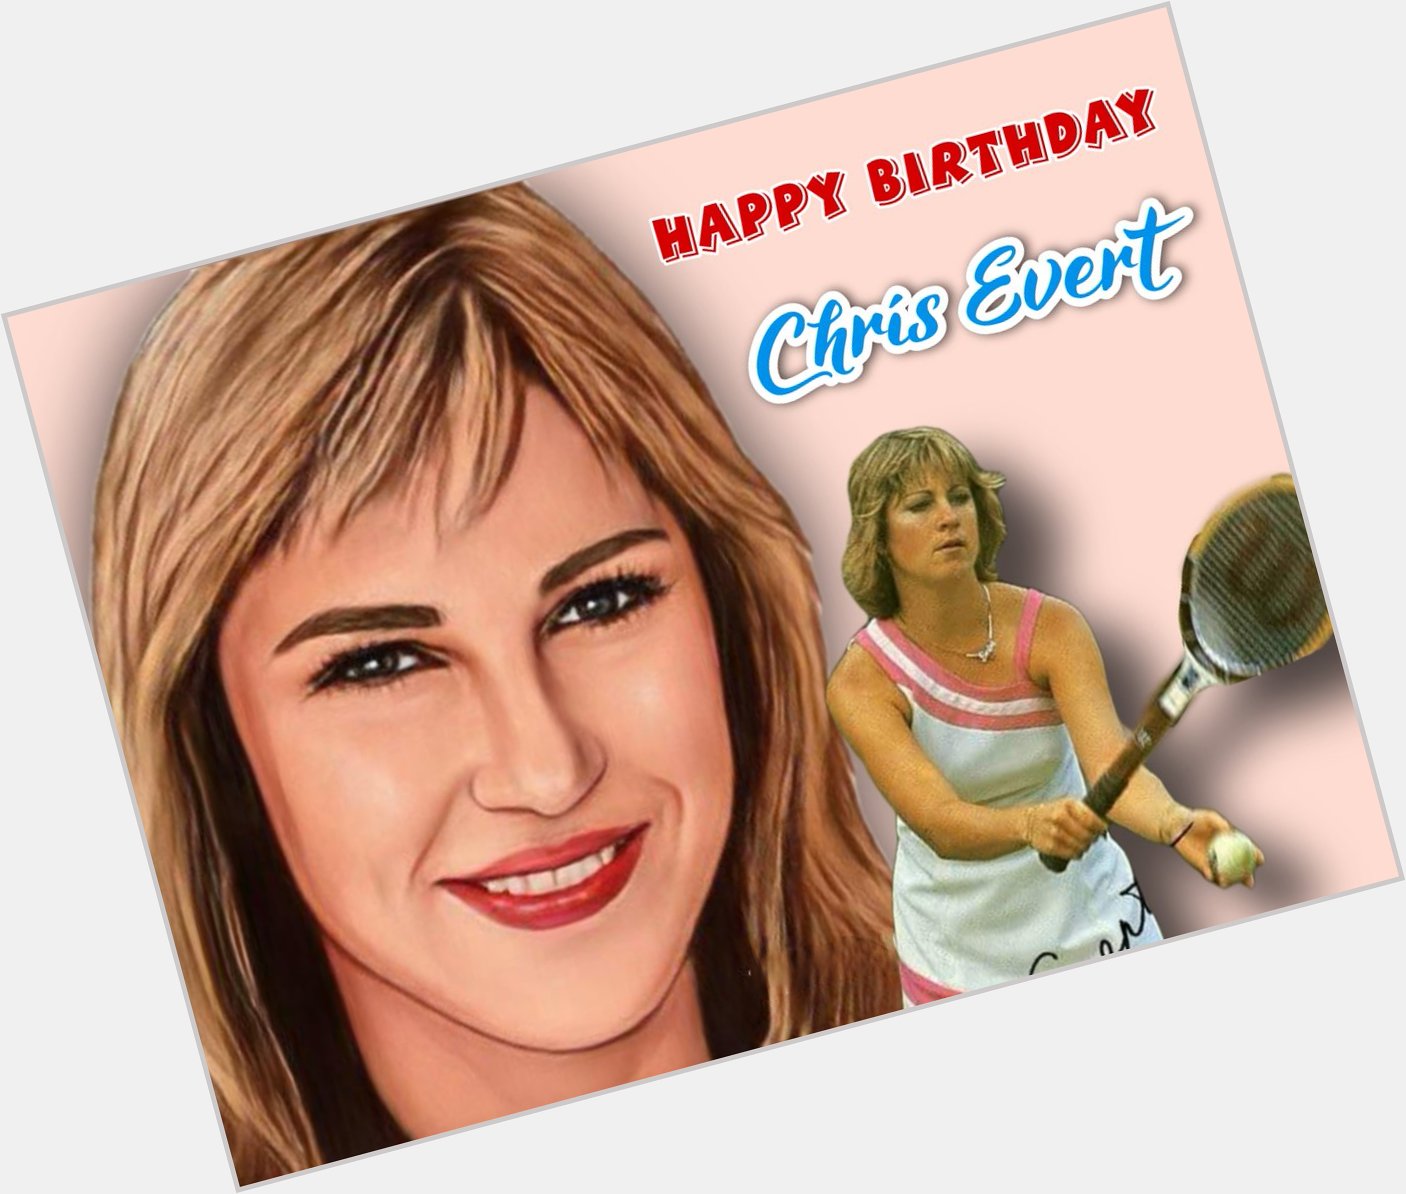  Happy Birthday Chris Evert..Reason I started following Women\s Tennis at the age of 13 (1980) 